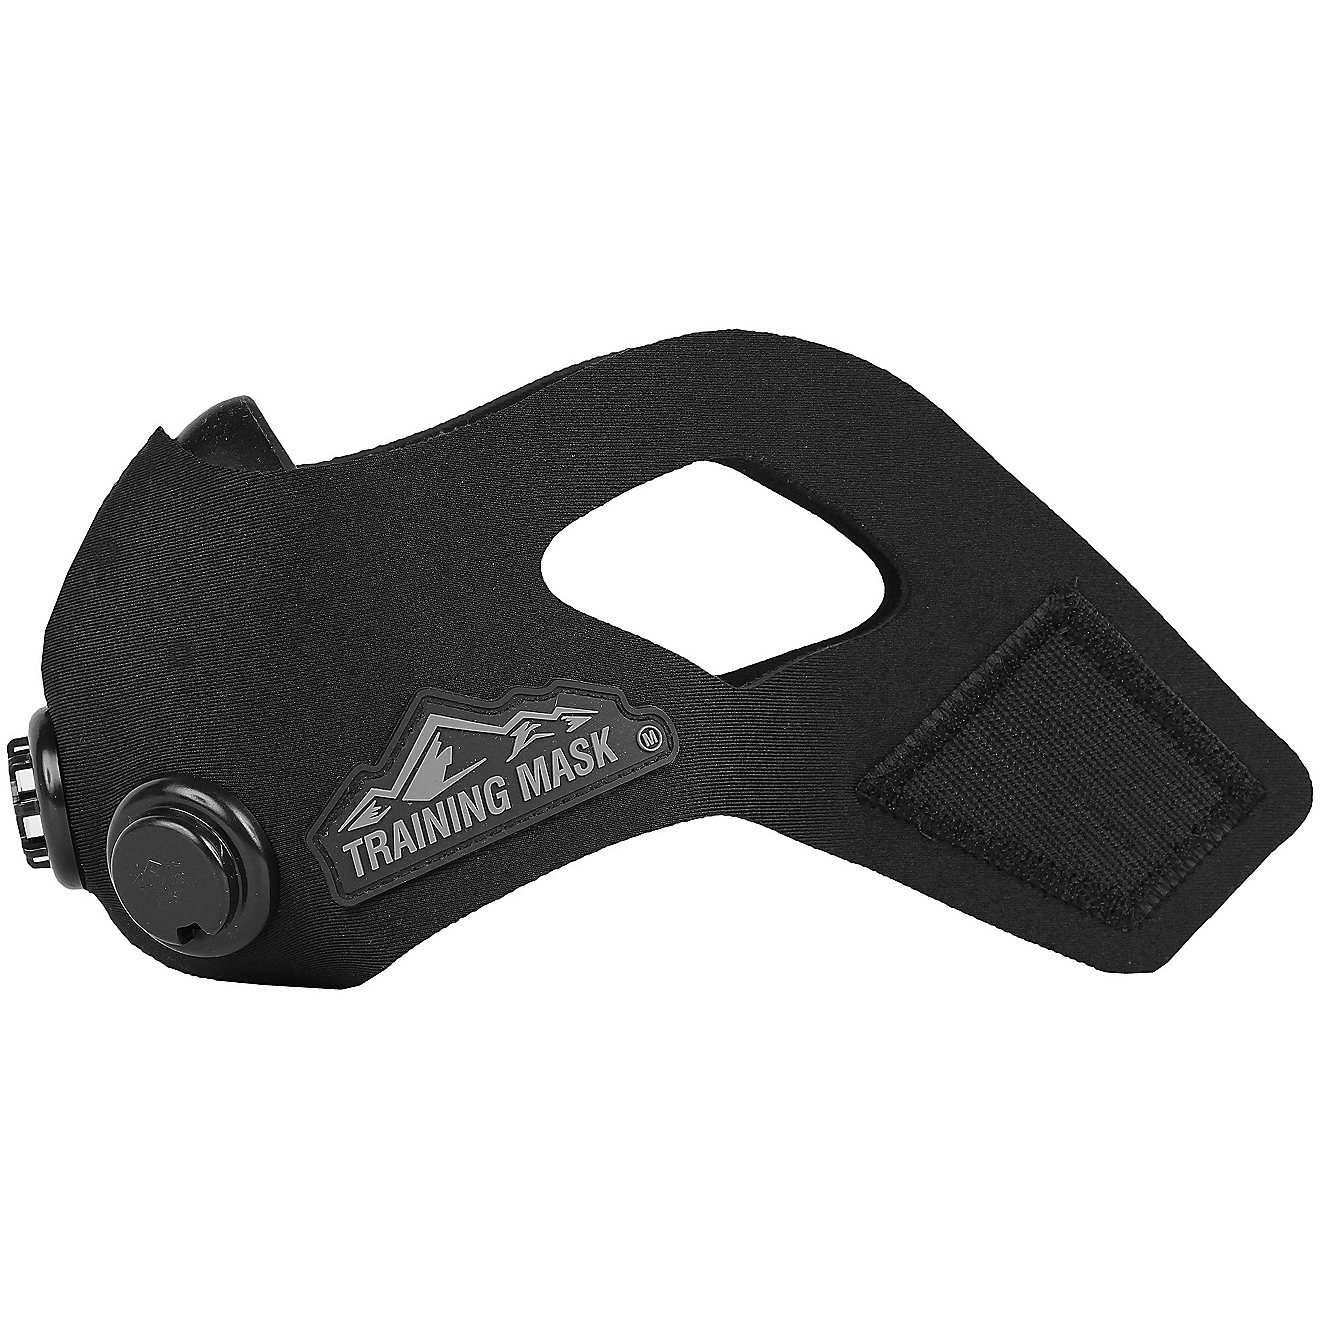 Training Mask 2.0 Black Out Respiratory Training Device                                                                          - view number 2